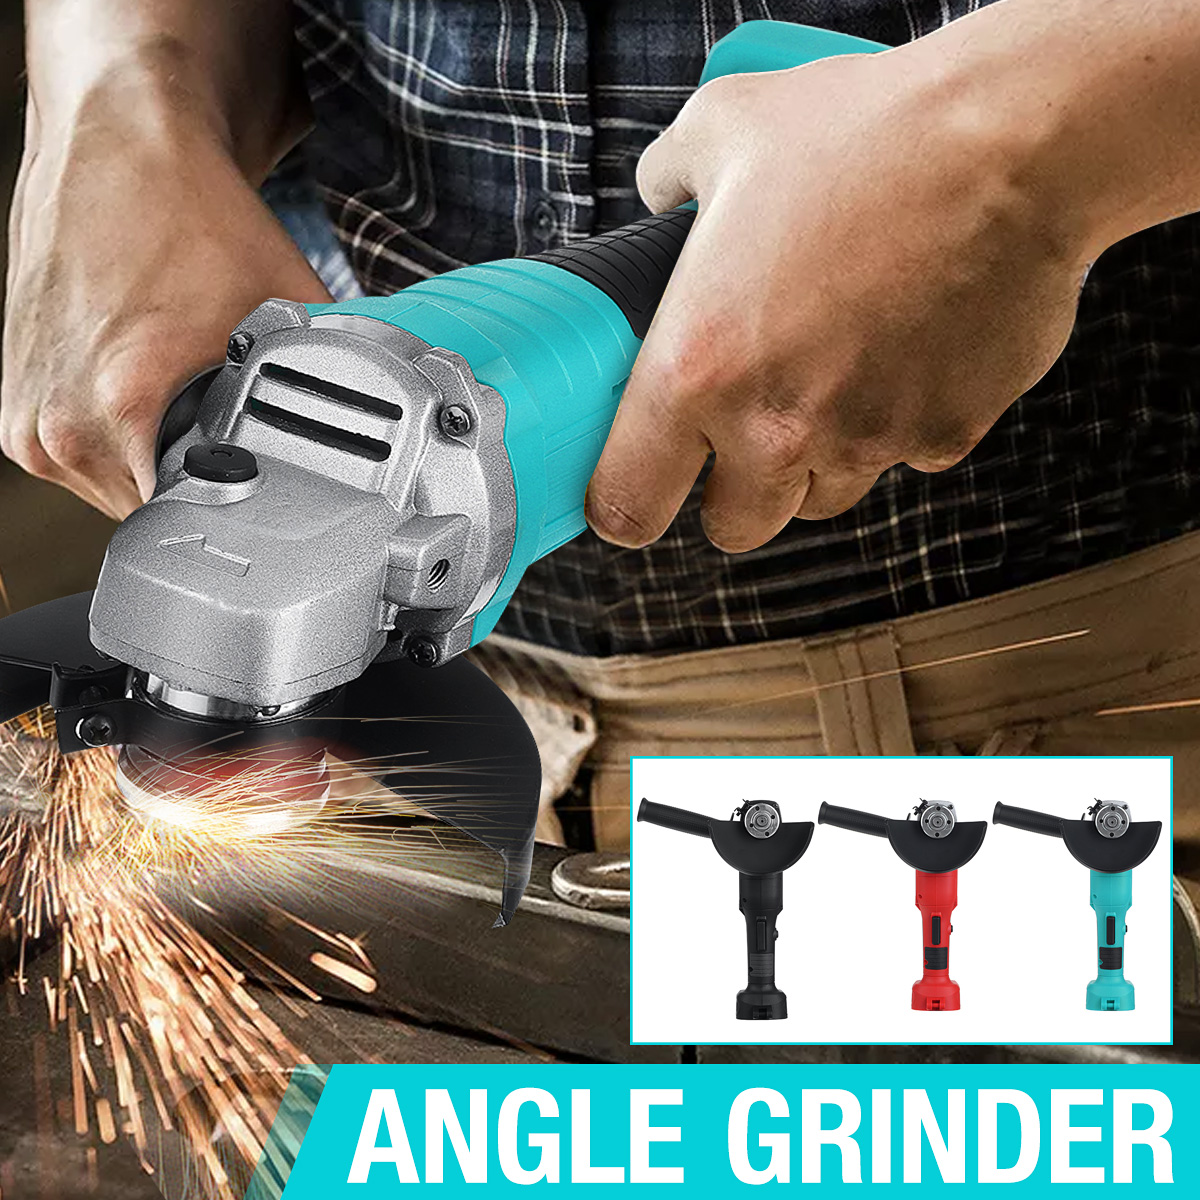 125mm-Cordless-Electric-Angle-Grinder-Cutting-Machine-Polisher-DIY-Power-Tool-1743685-1